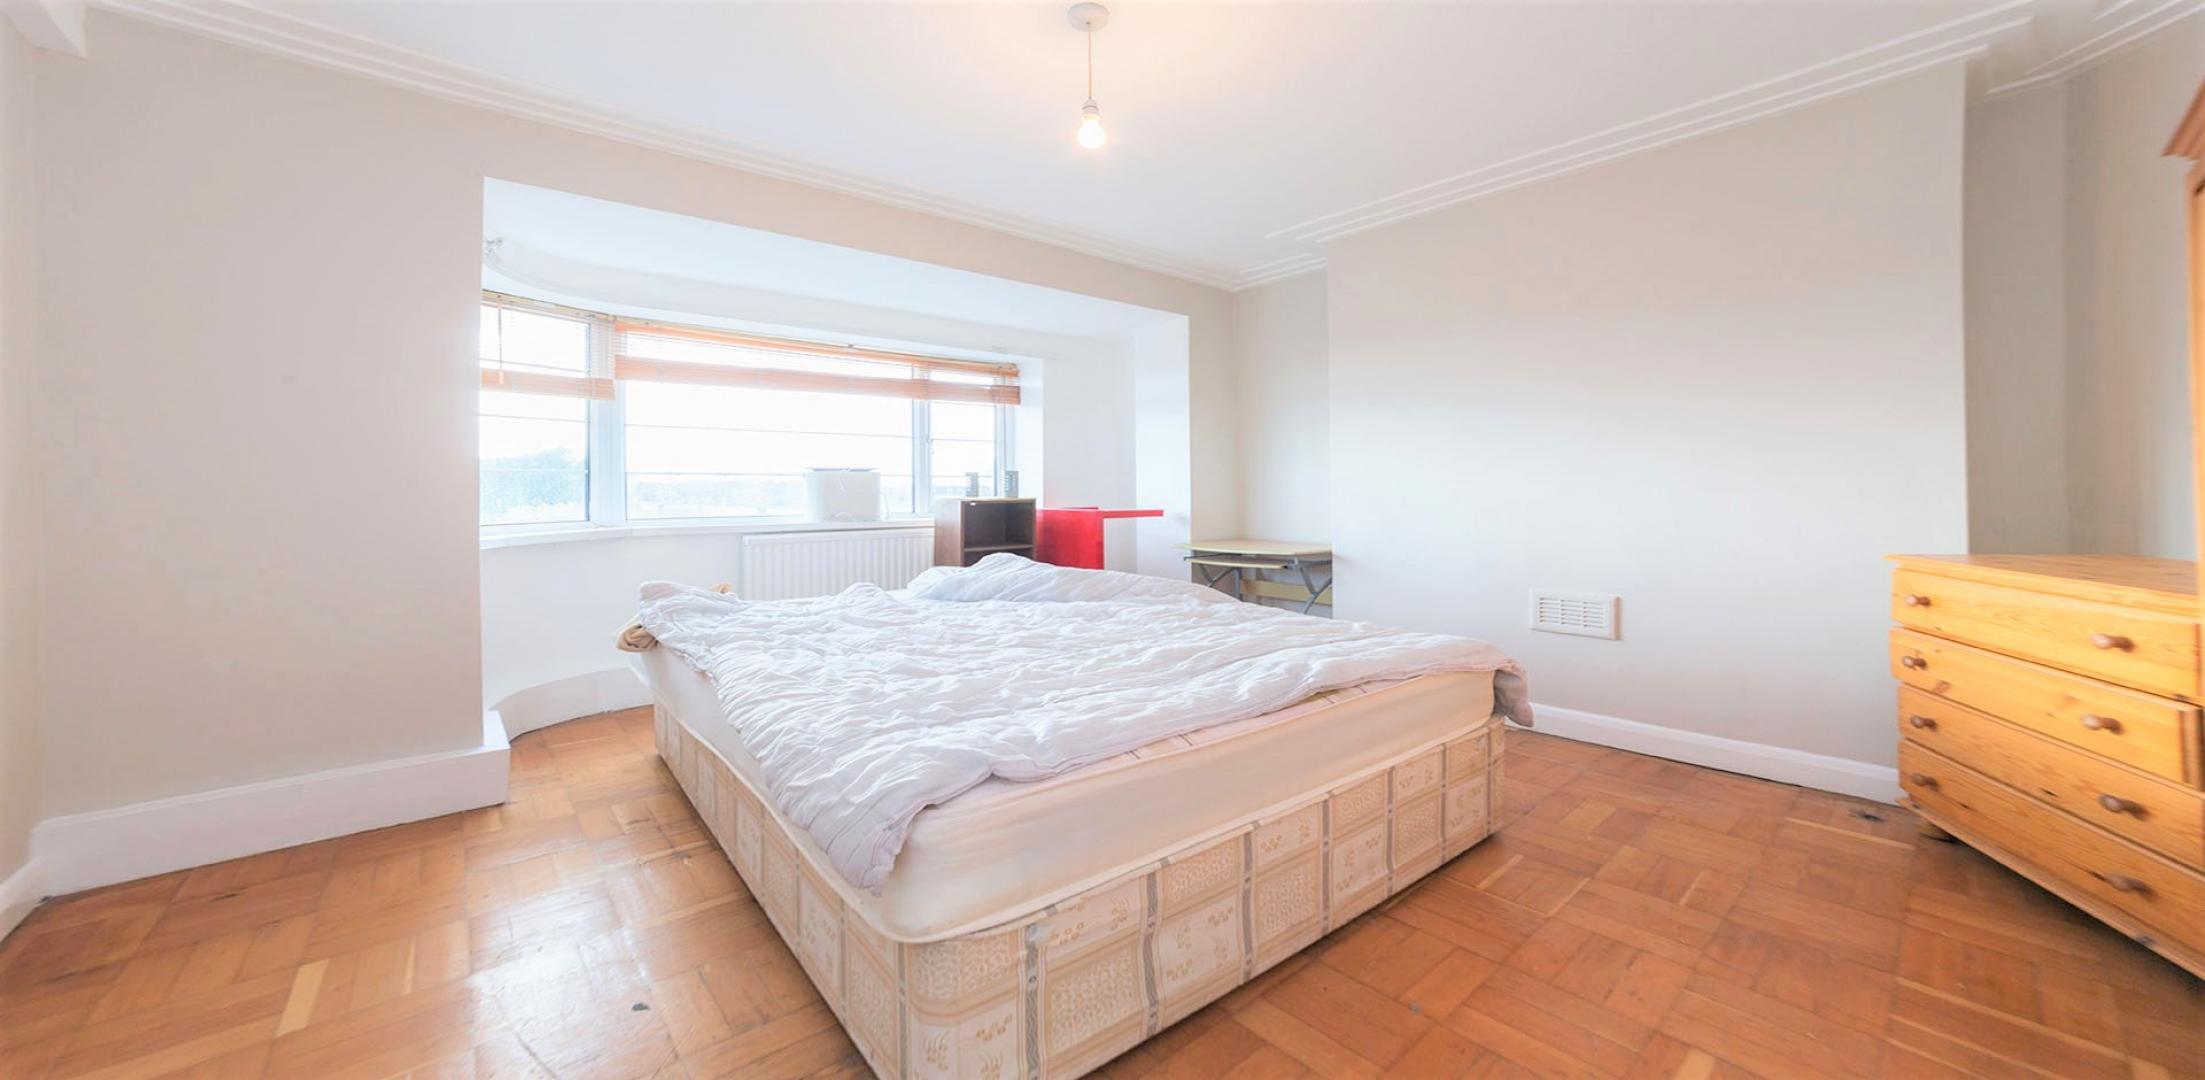 			RECENTLY REDECORATED , 2 Bedroom, 1 bath, 1 reception Flat			 Oman Avenue, WILLESDEN GREEN